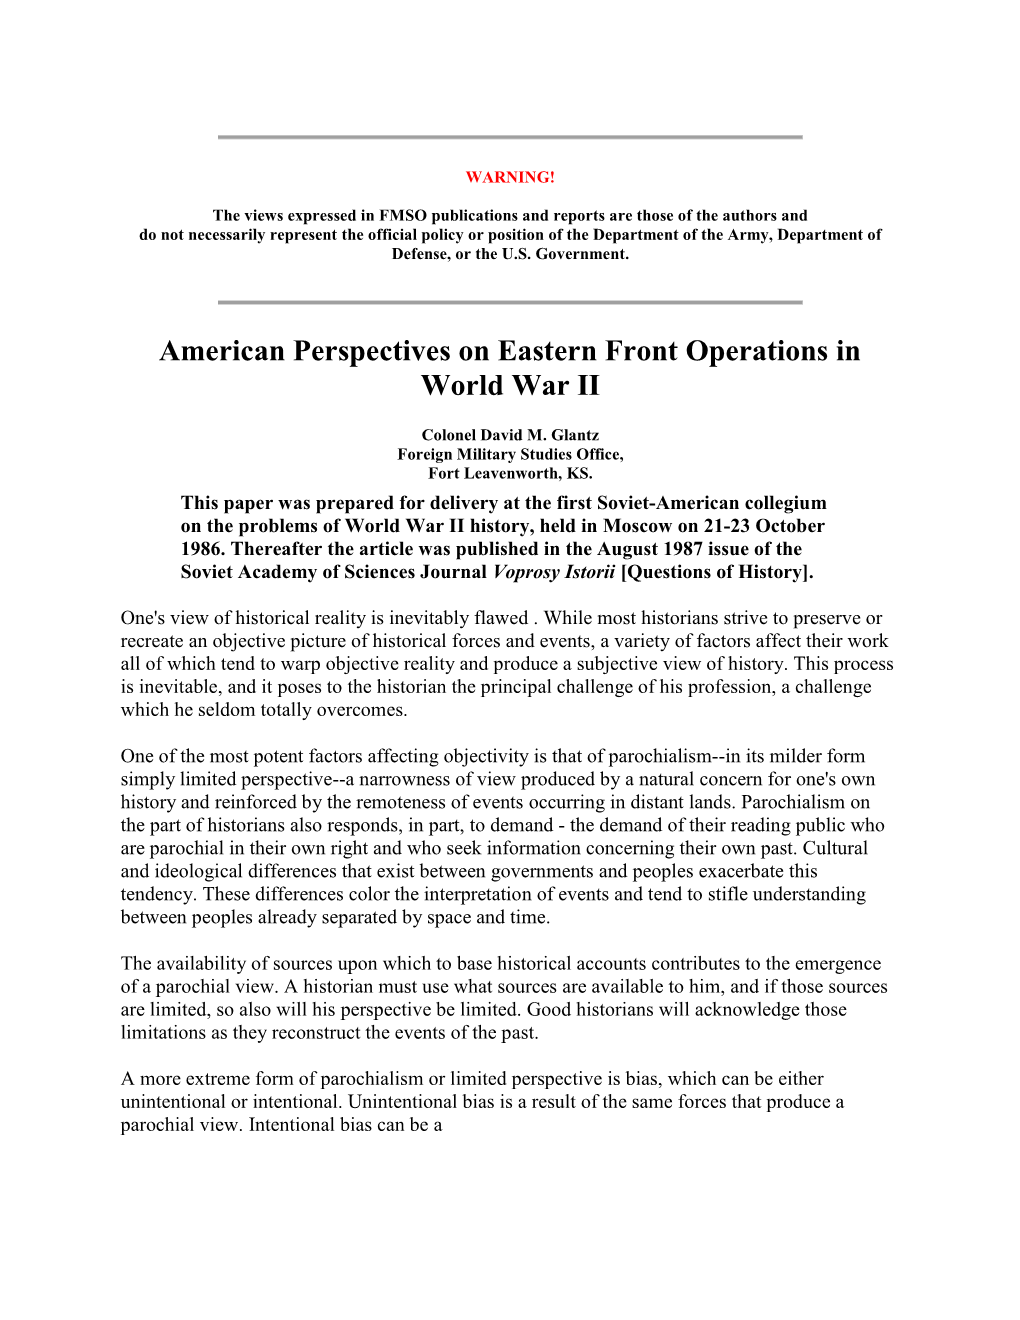 American Perspectives on Eastern Front Operations in World War II